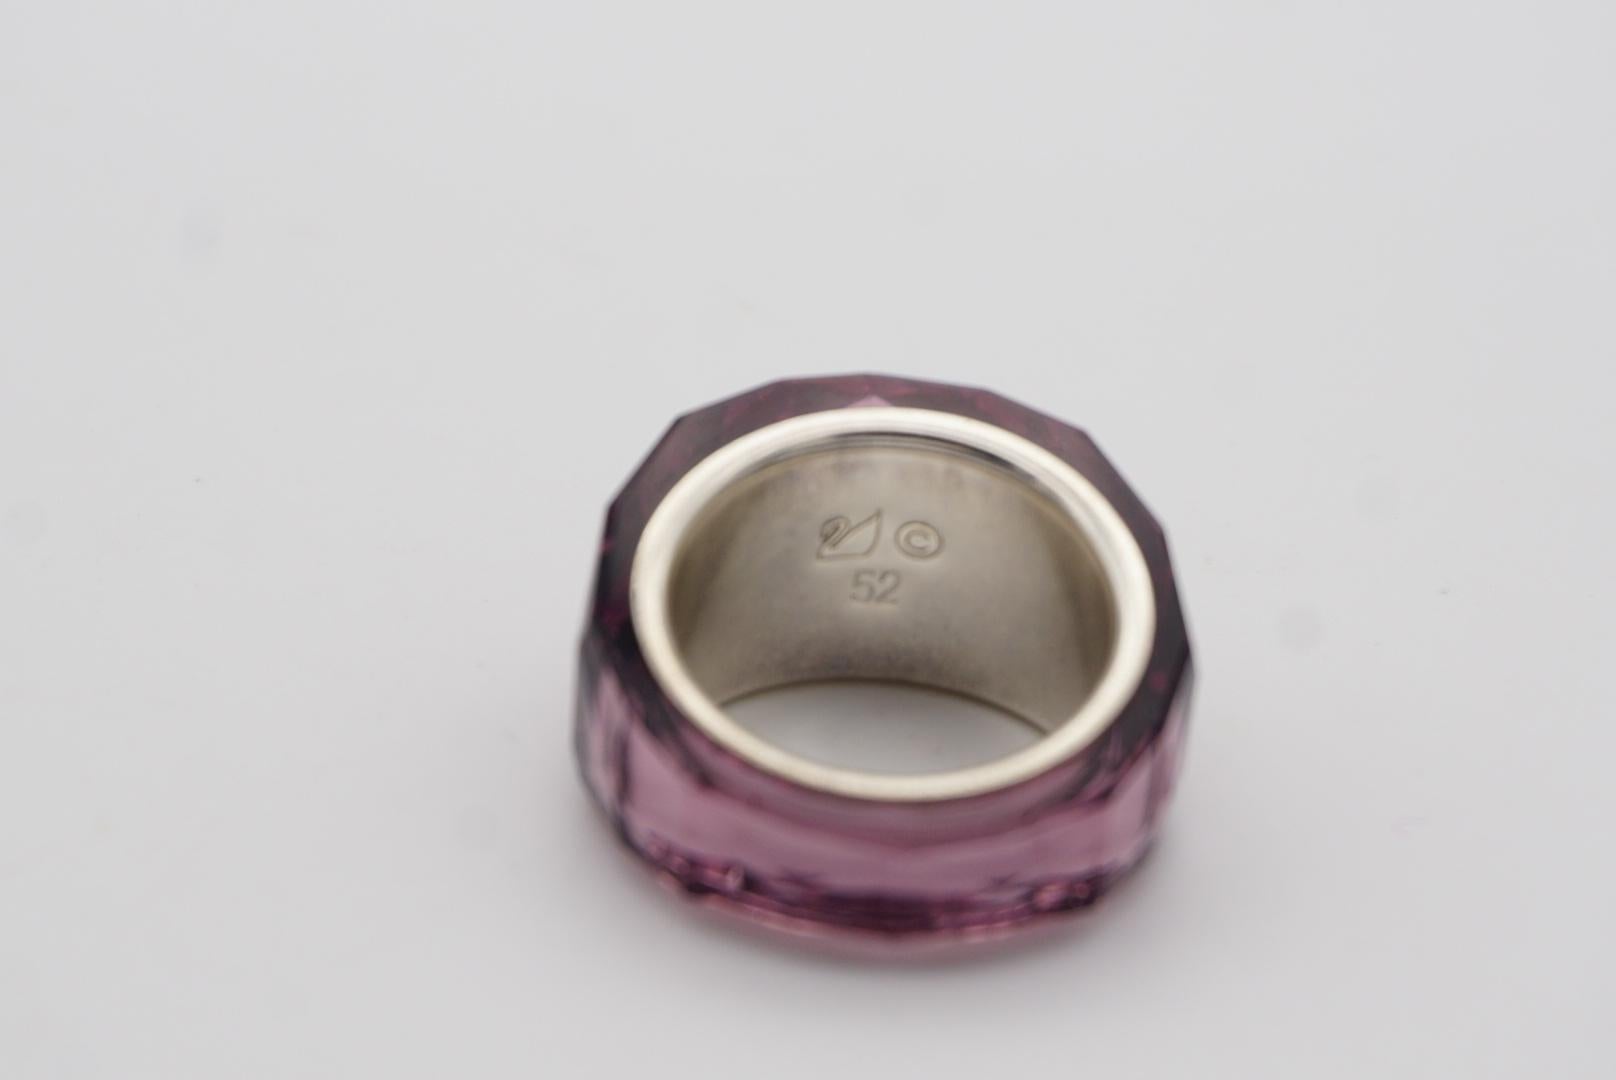 Swarovski Nirvana Cocktail Fully Cut Purple Petite Small Ring, Silver Plated, 52 For Sale 1